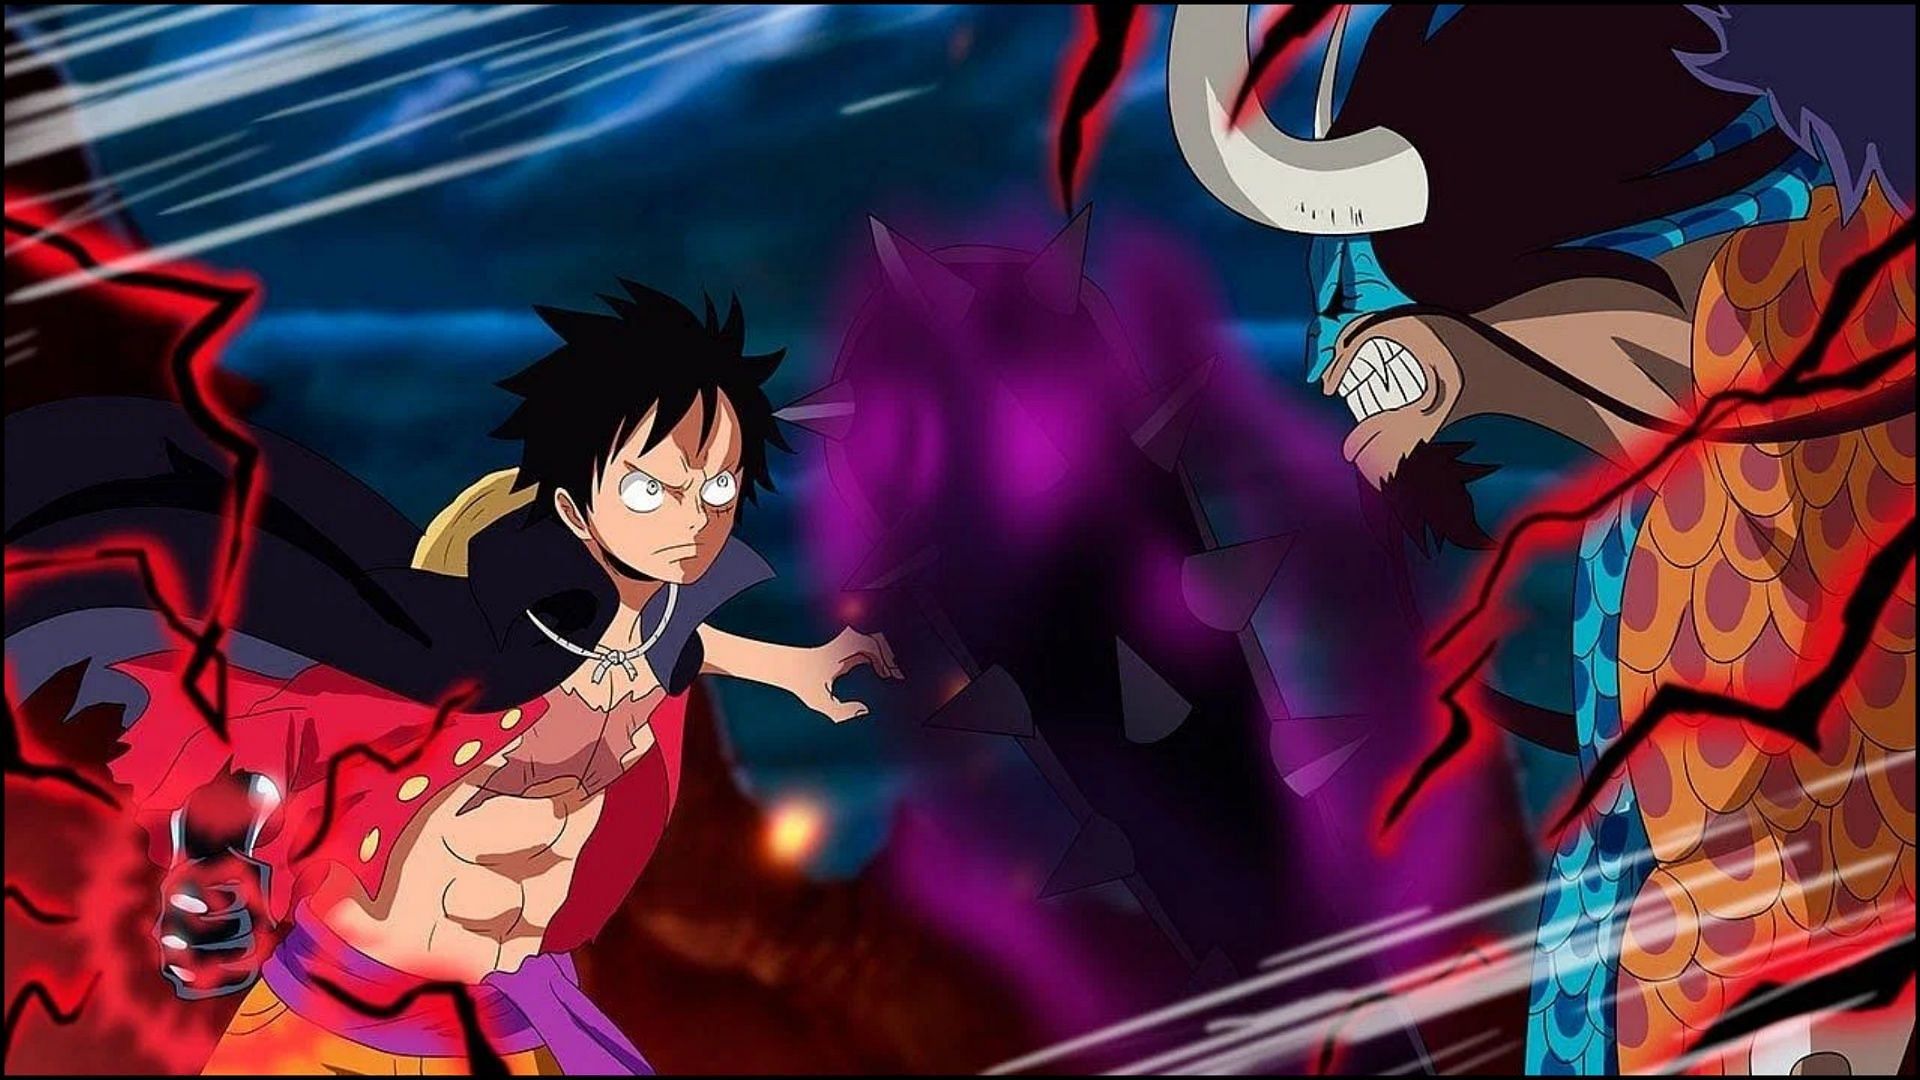 One Piece 1070 breaks the internet with the return of Joy Boy and Gear 5